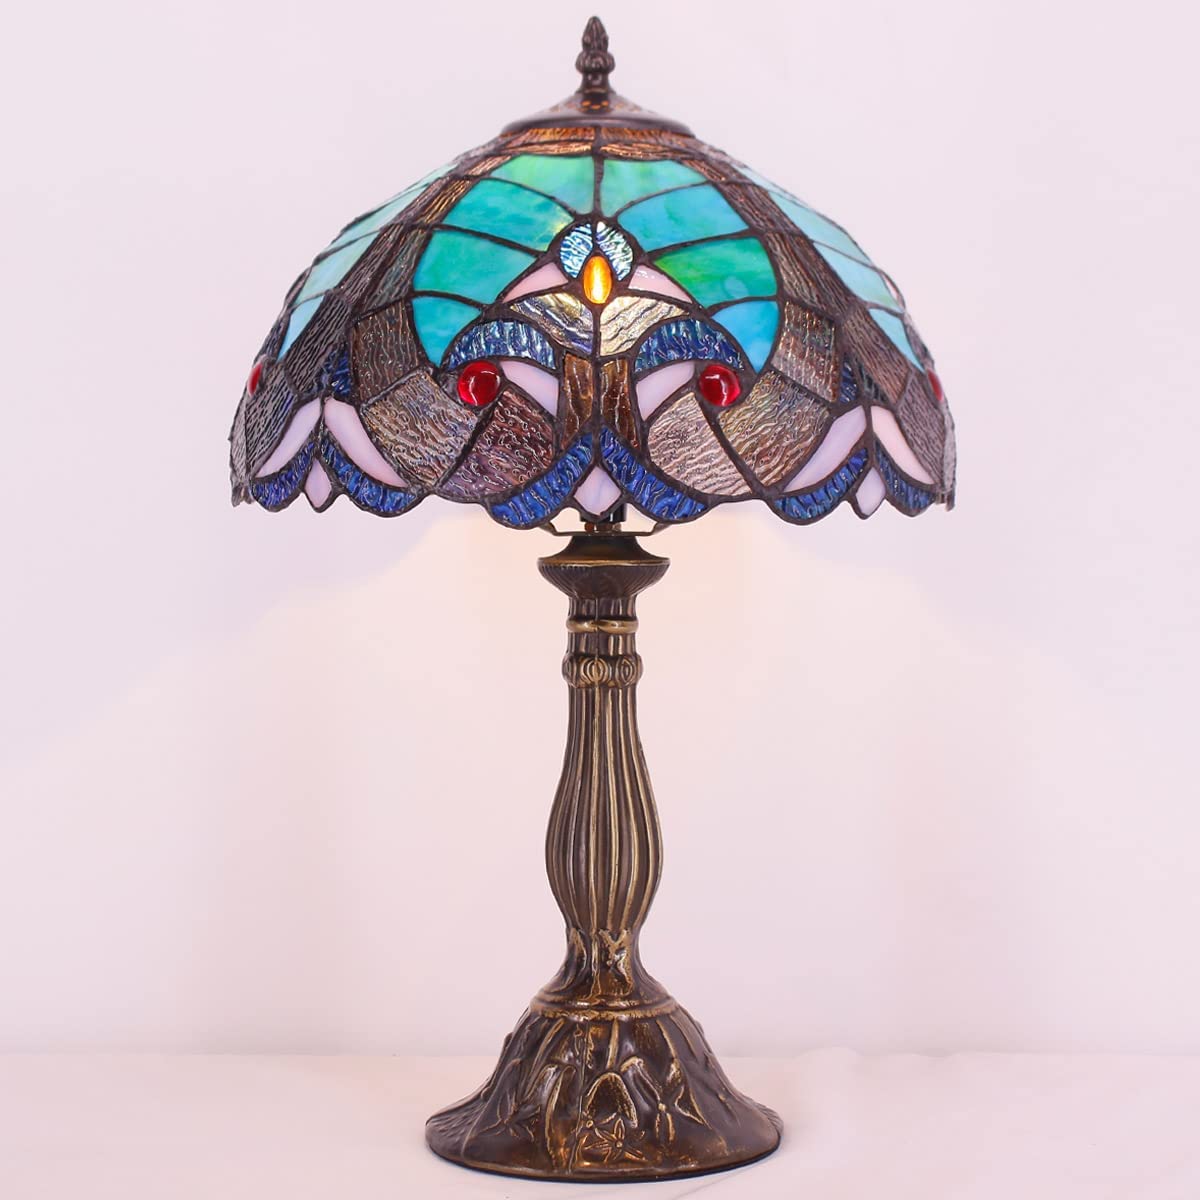 SHADY  Style Lamp Green Liaison Stained Glass Bedside Table Lamp Reading Desk Light 12X12X18 Inches Decor Nightstand Bedroom Living Room Home Office S160G Series